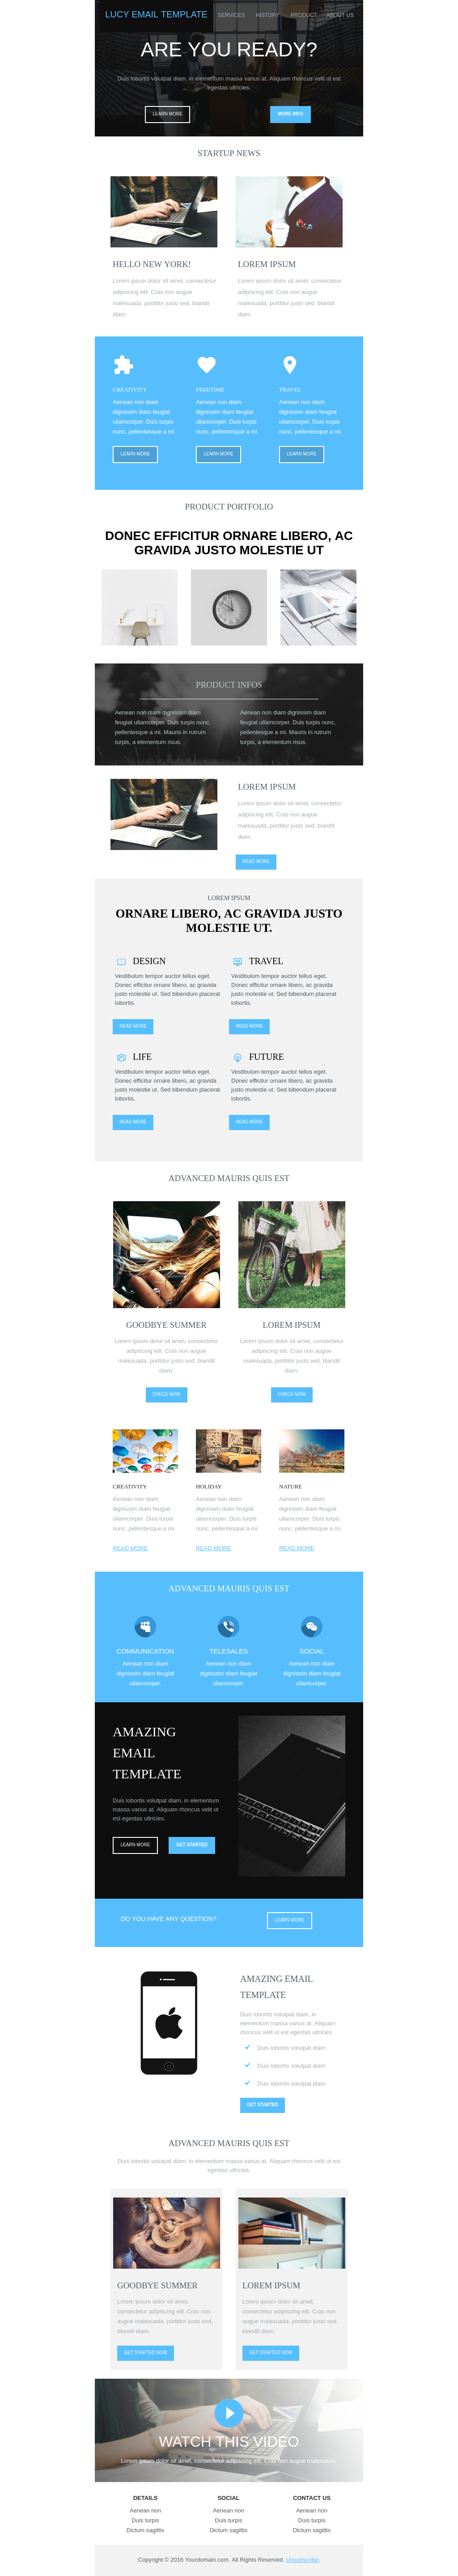 Multi-industry B2B product e-commerce promotional email template